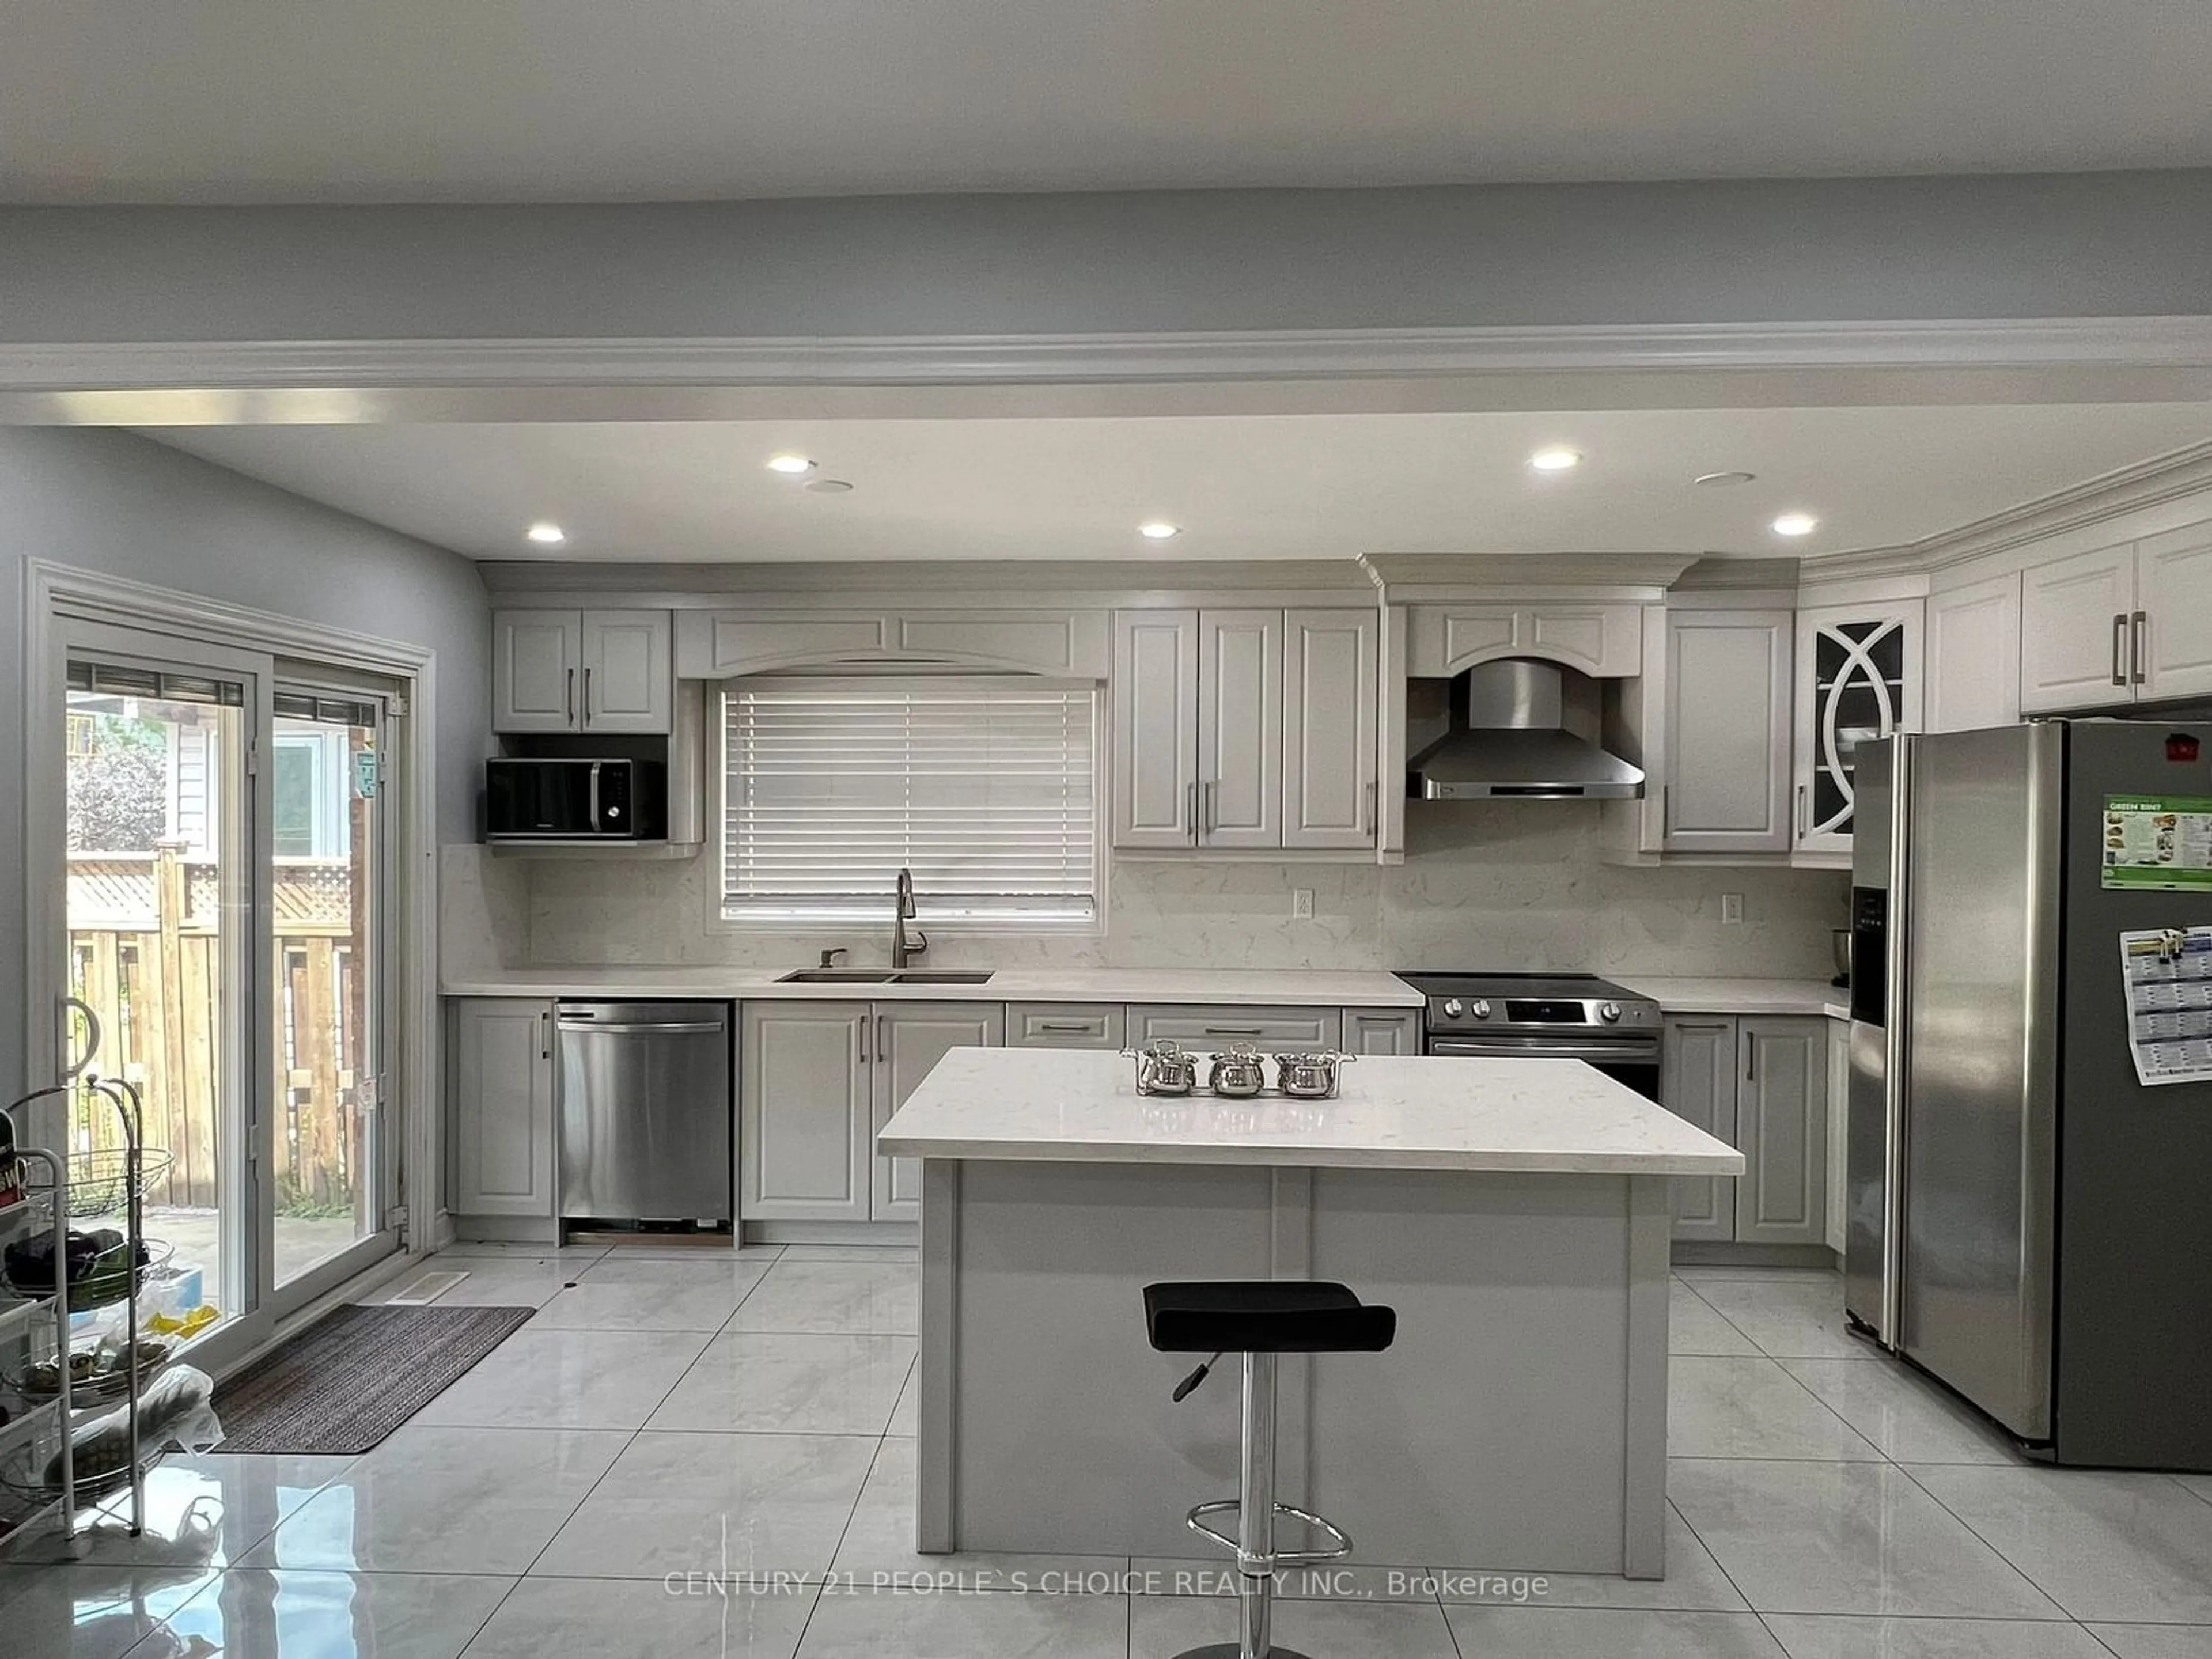 Contemporary kitchen for 89 Upper Humber Dr, Toronto Ontario M9W 7B6